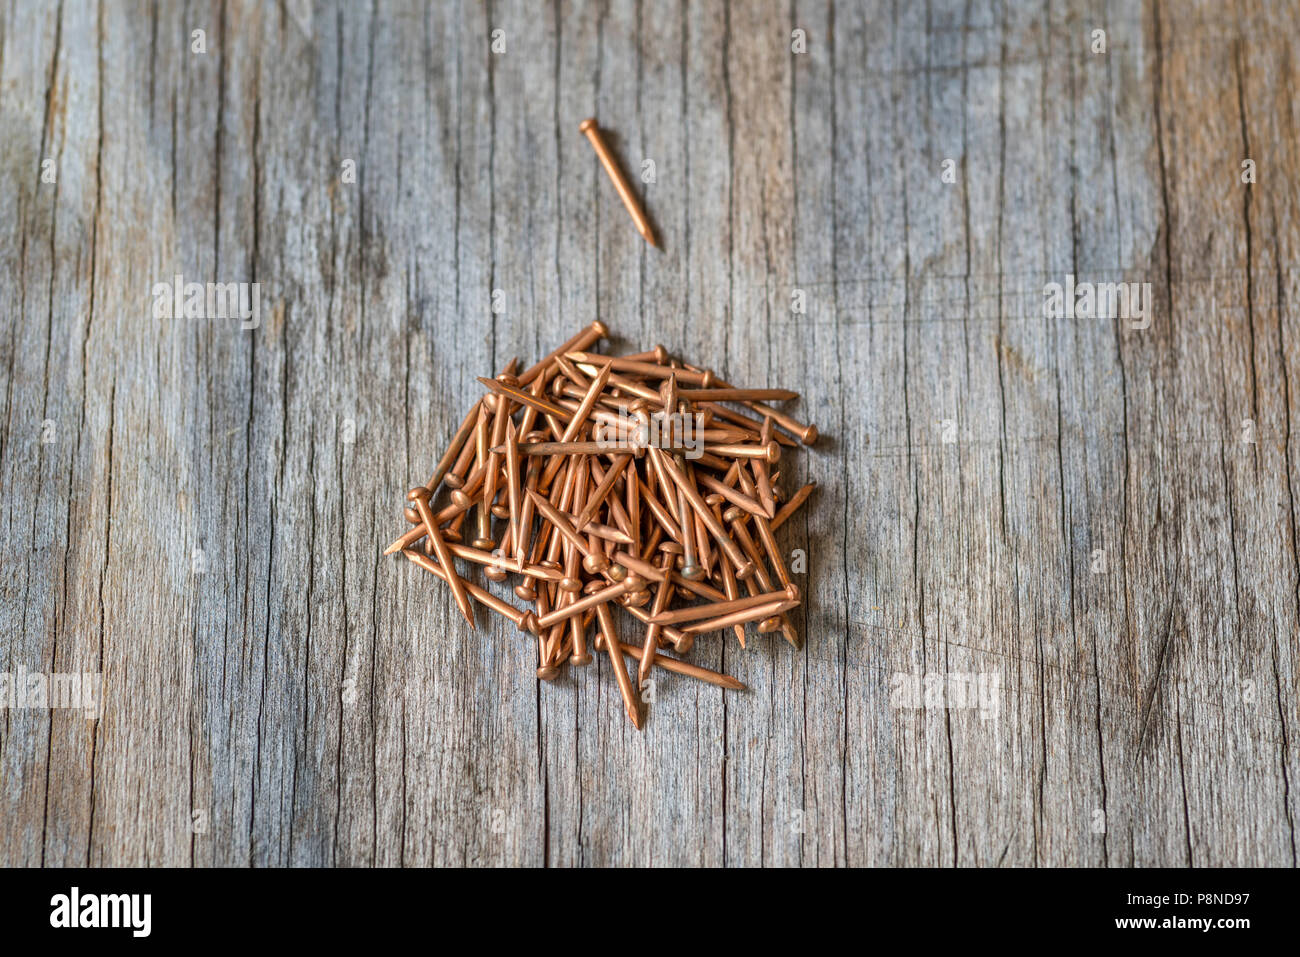 Close up of a group of bronze nails on a wood grain background. Stock Photo